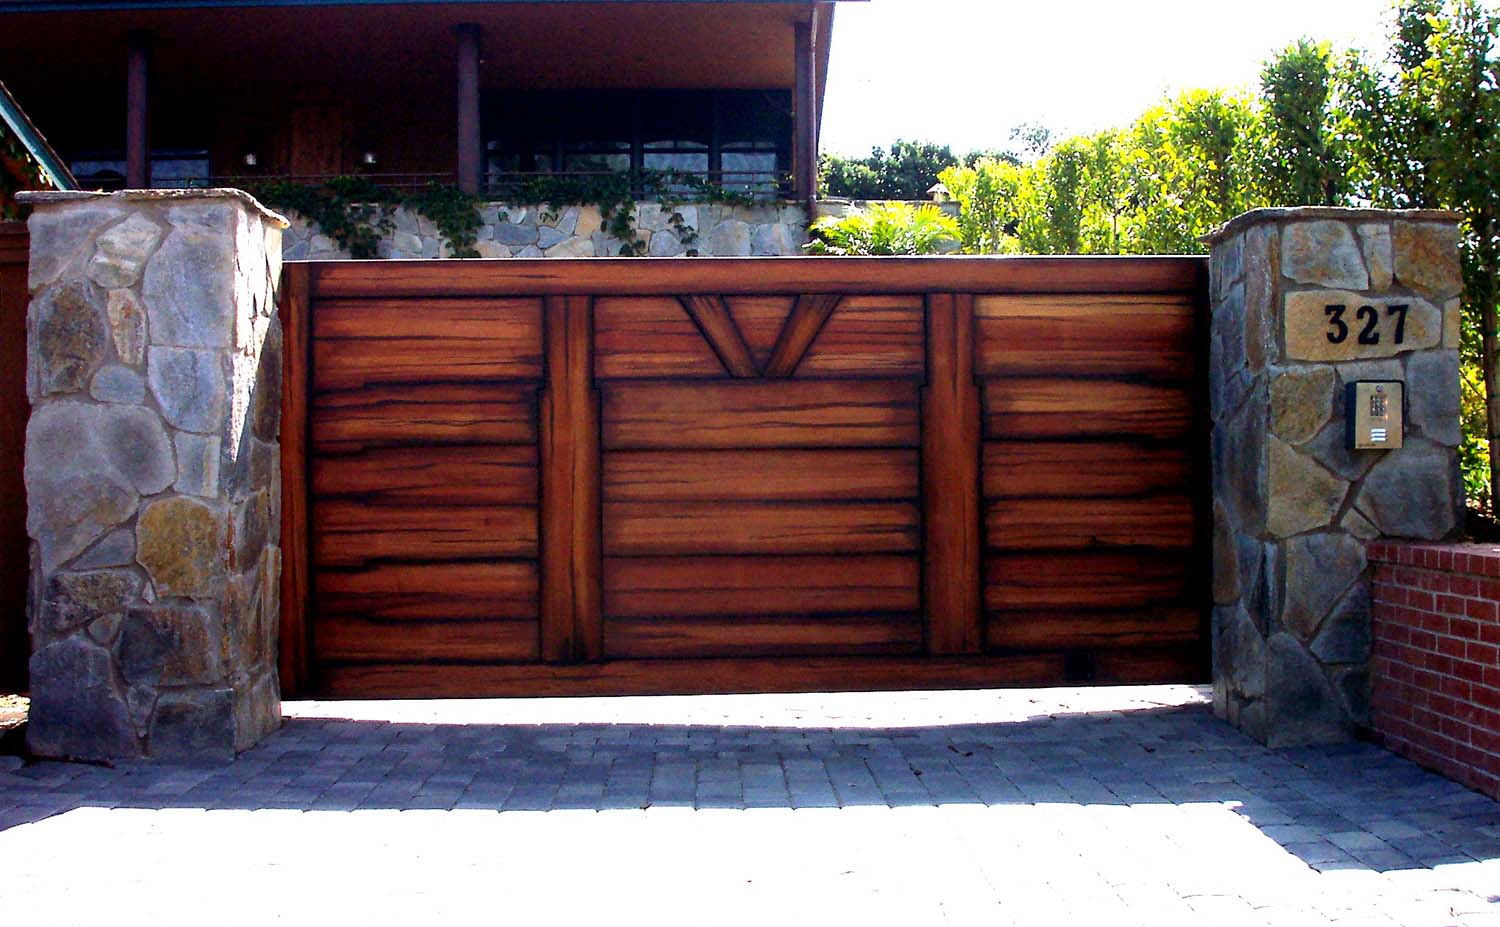 Drive Gates protect the home from the outside